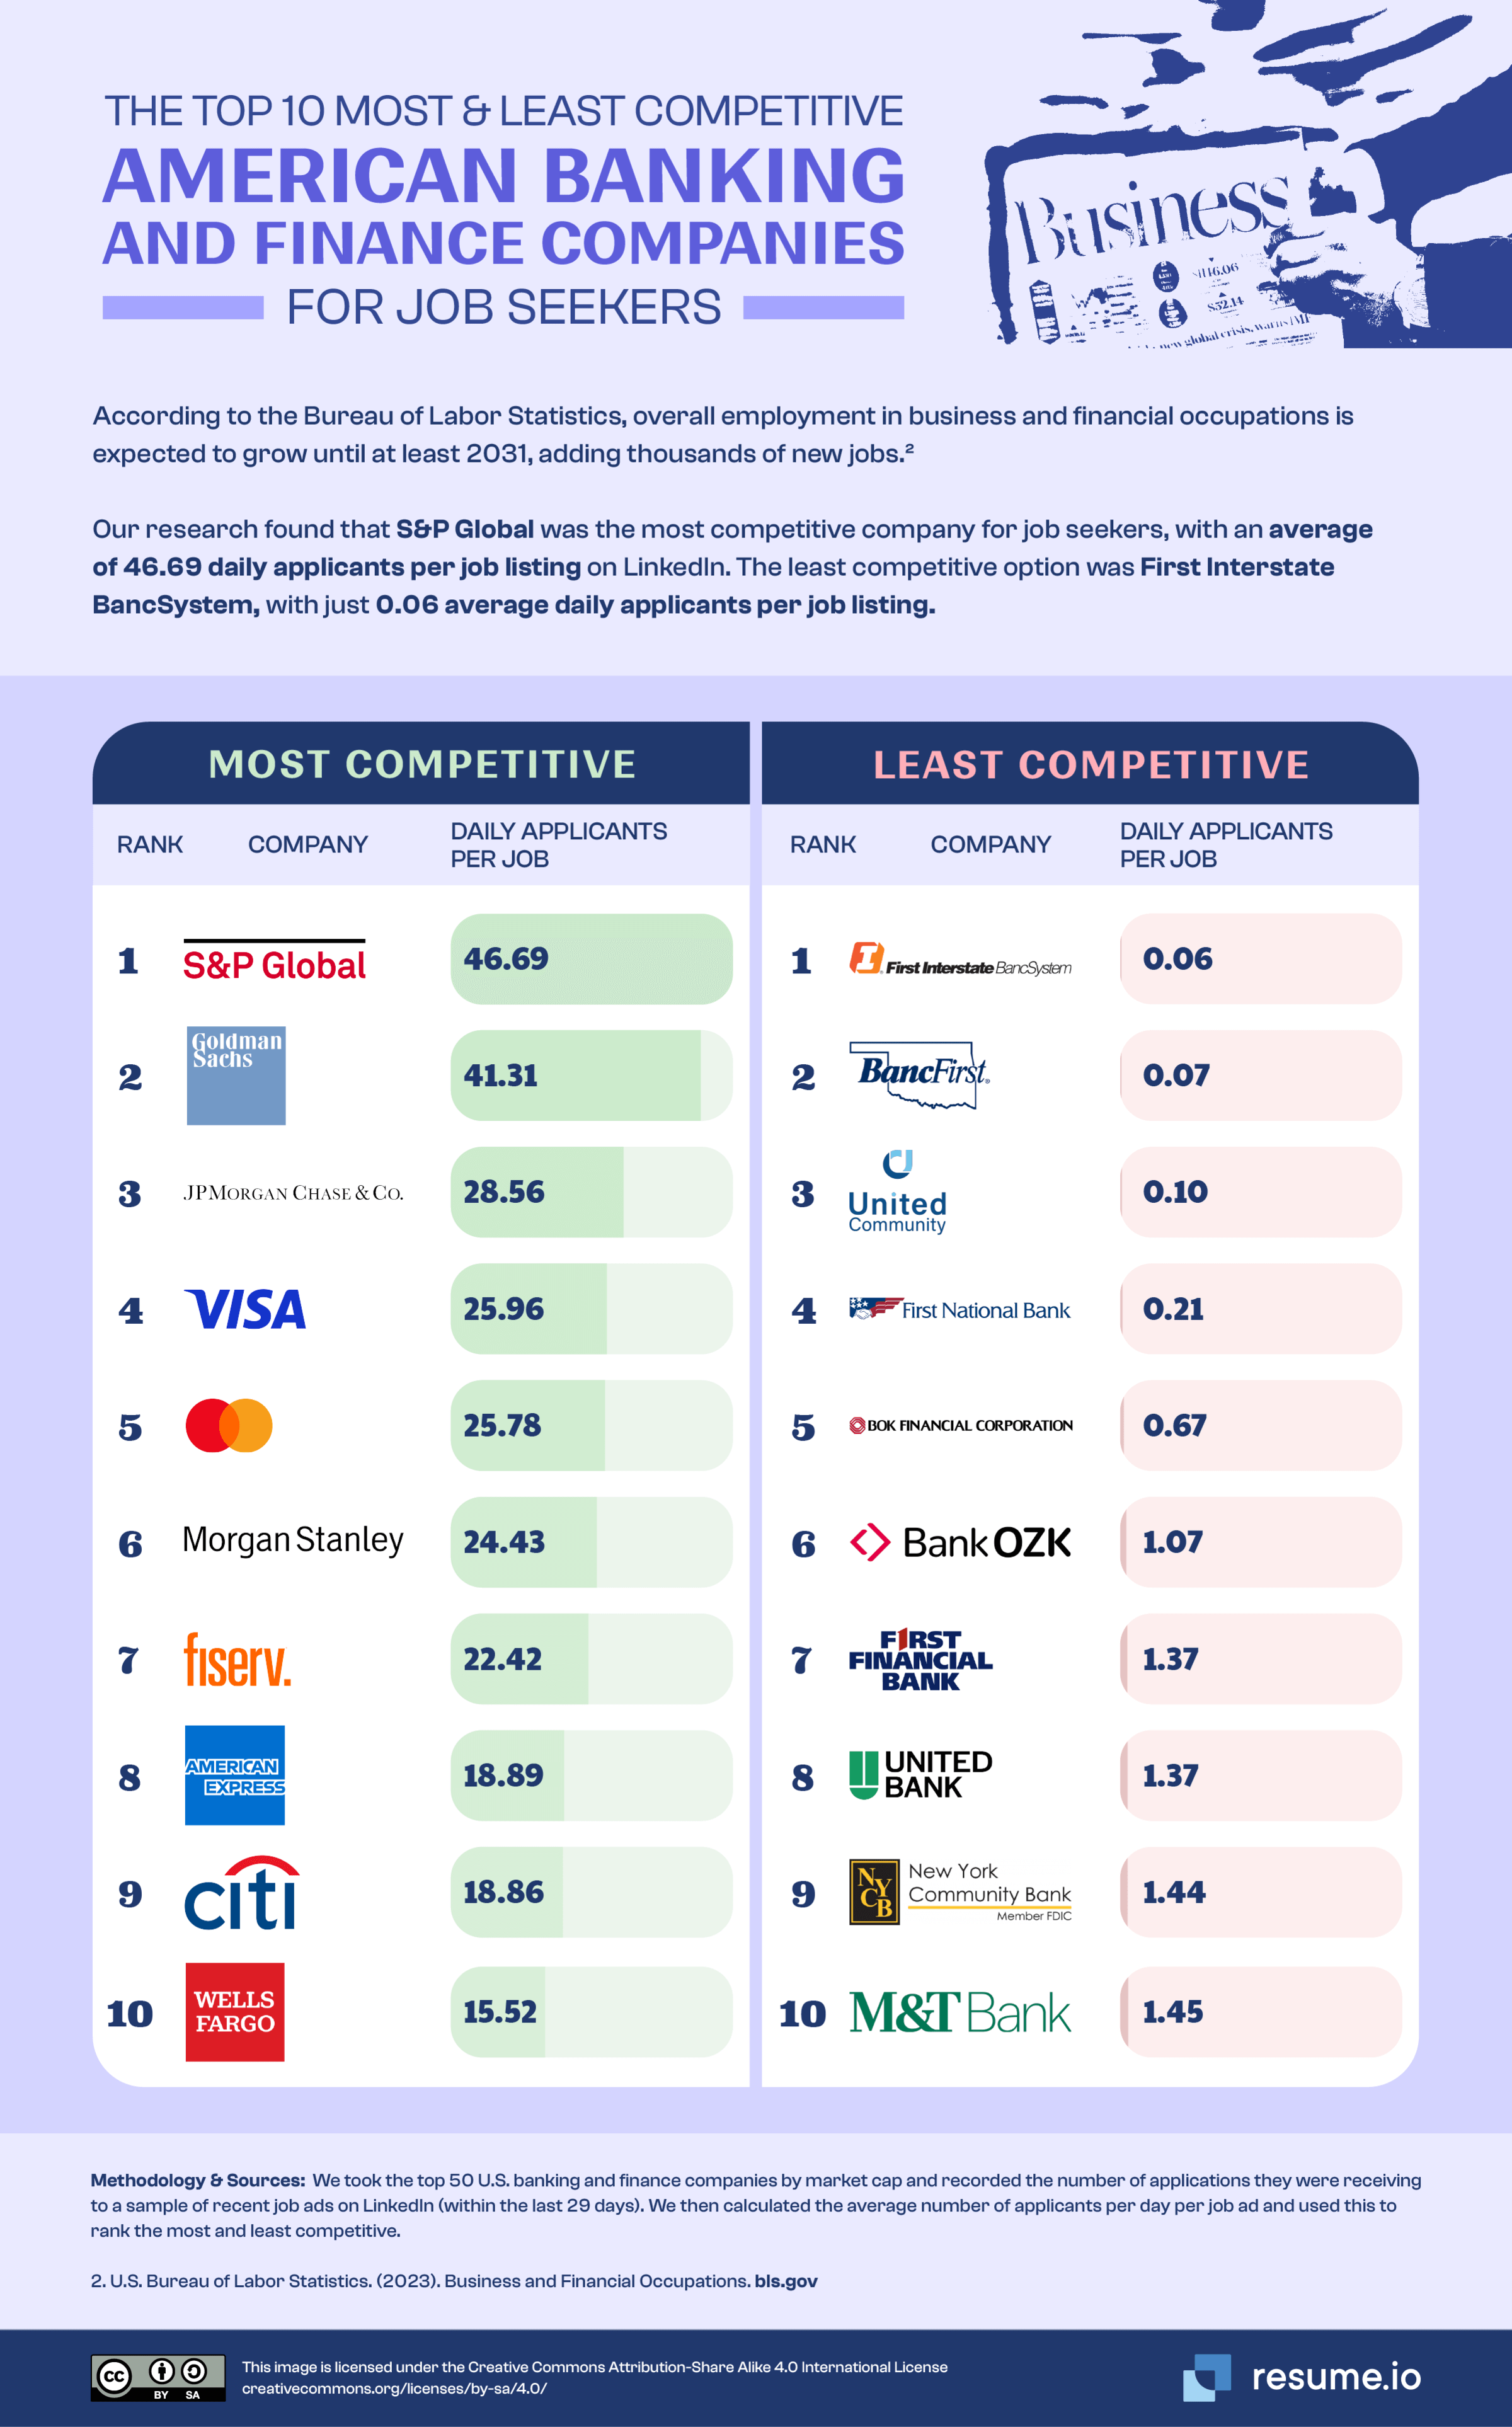 The top 10 most and least competitive banking and finance companies